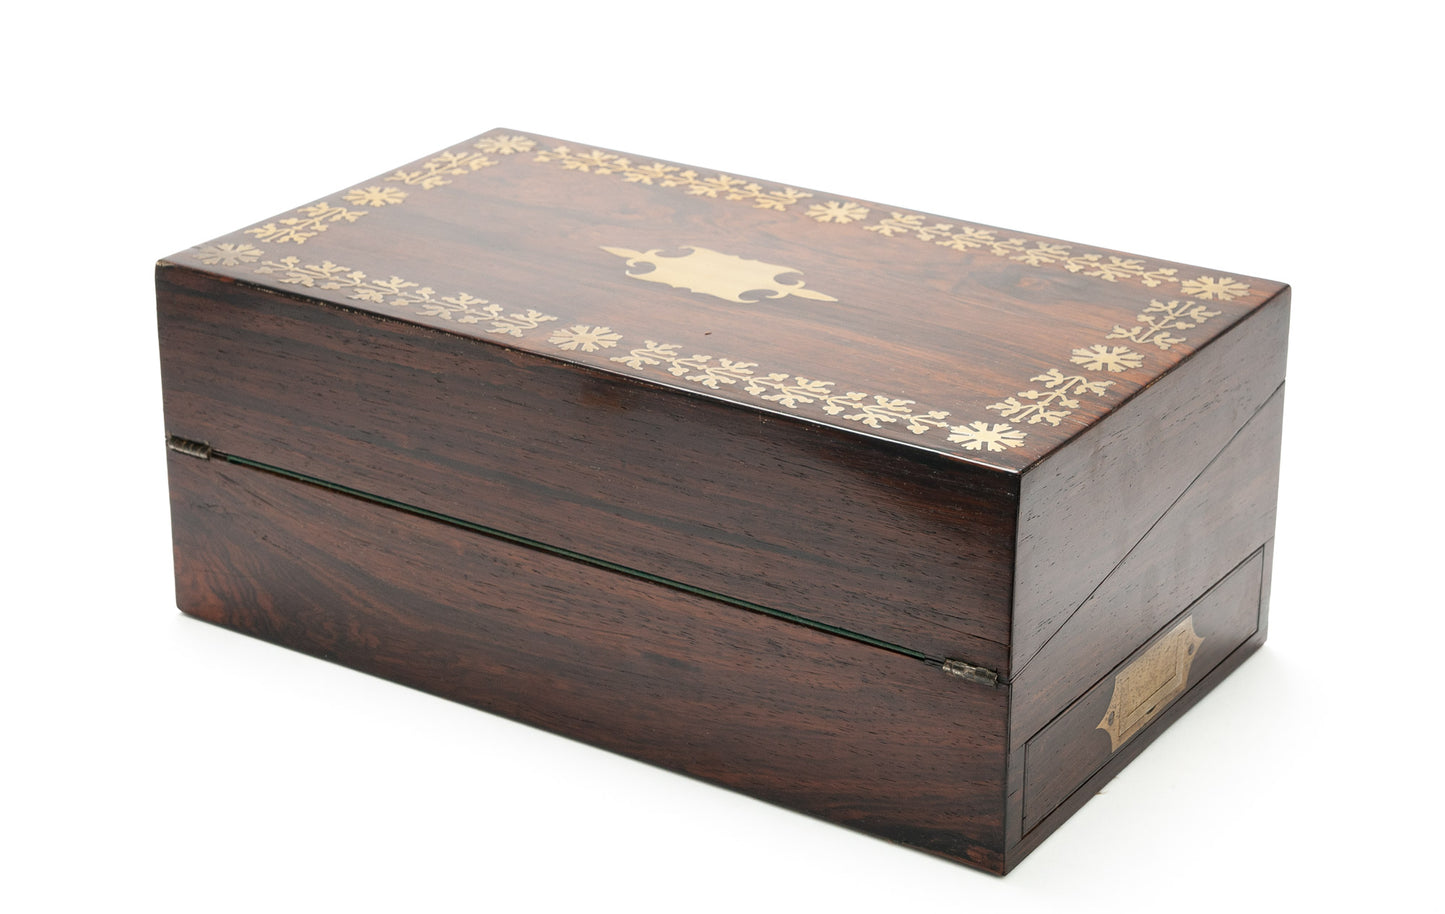 Antique William Colsey Mansion House London Rosewood & Brass Writing Slope Box (Code 2080)